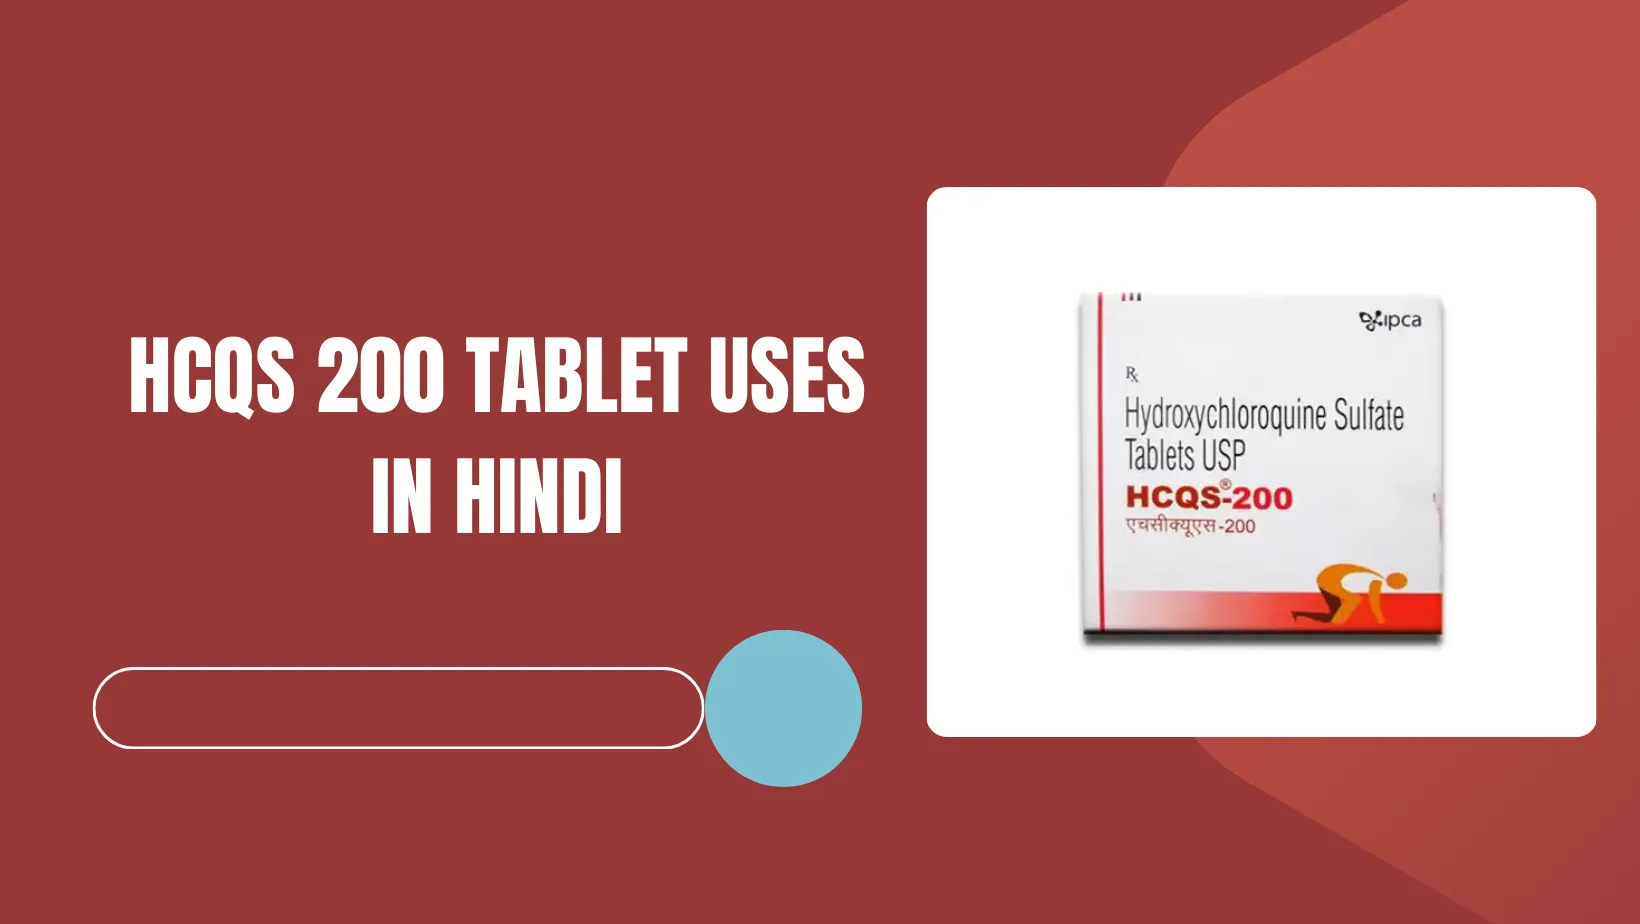 Hcqs 200 Tablet Uses In Hindi